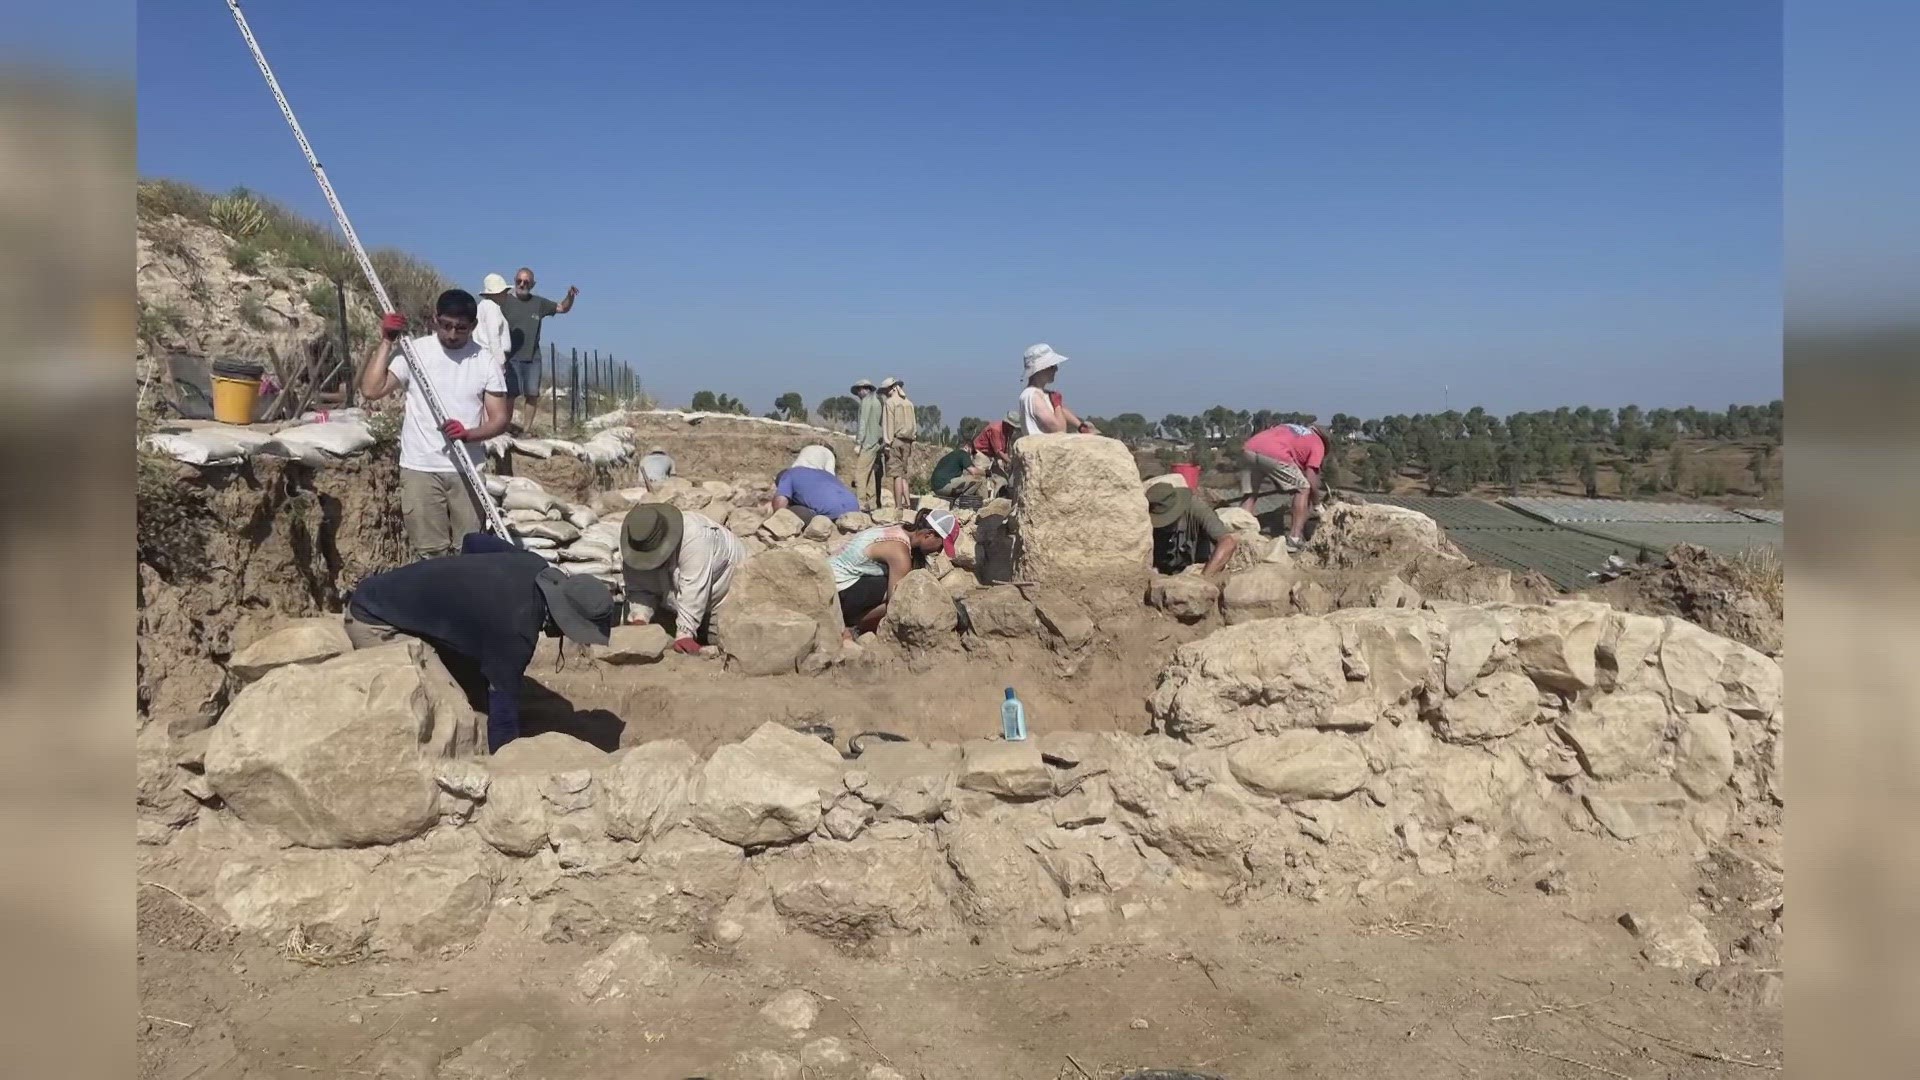 Three Tennessee scholars are back home after spending three weeks on an archaeological dig in Israel.